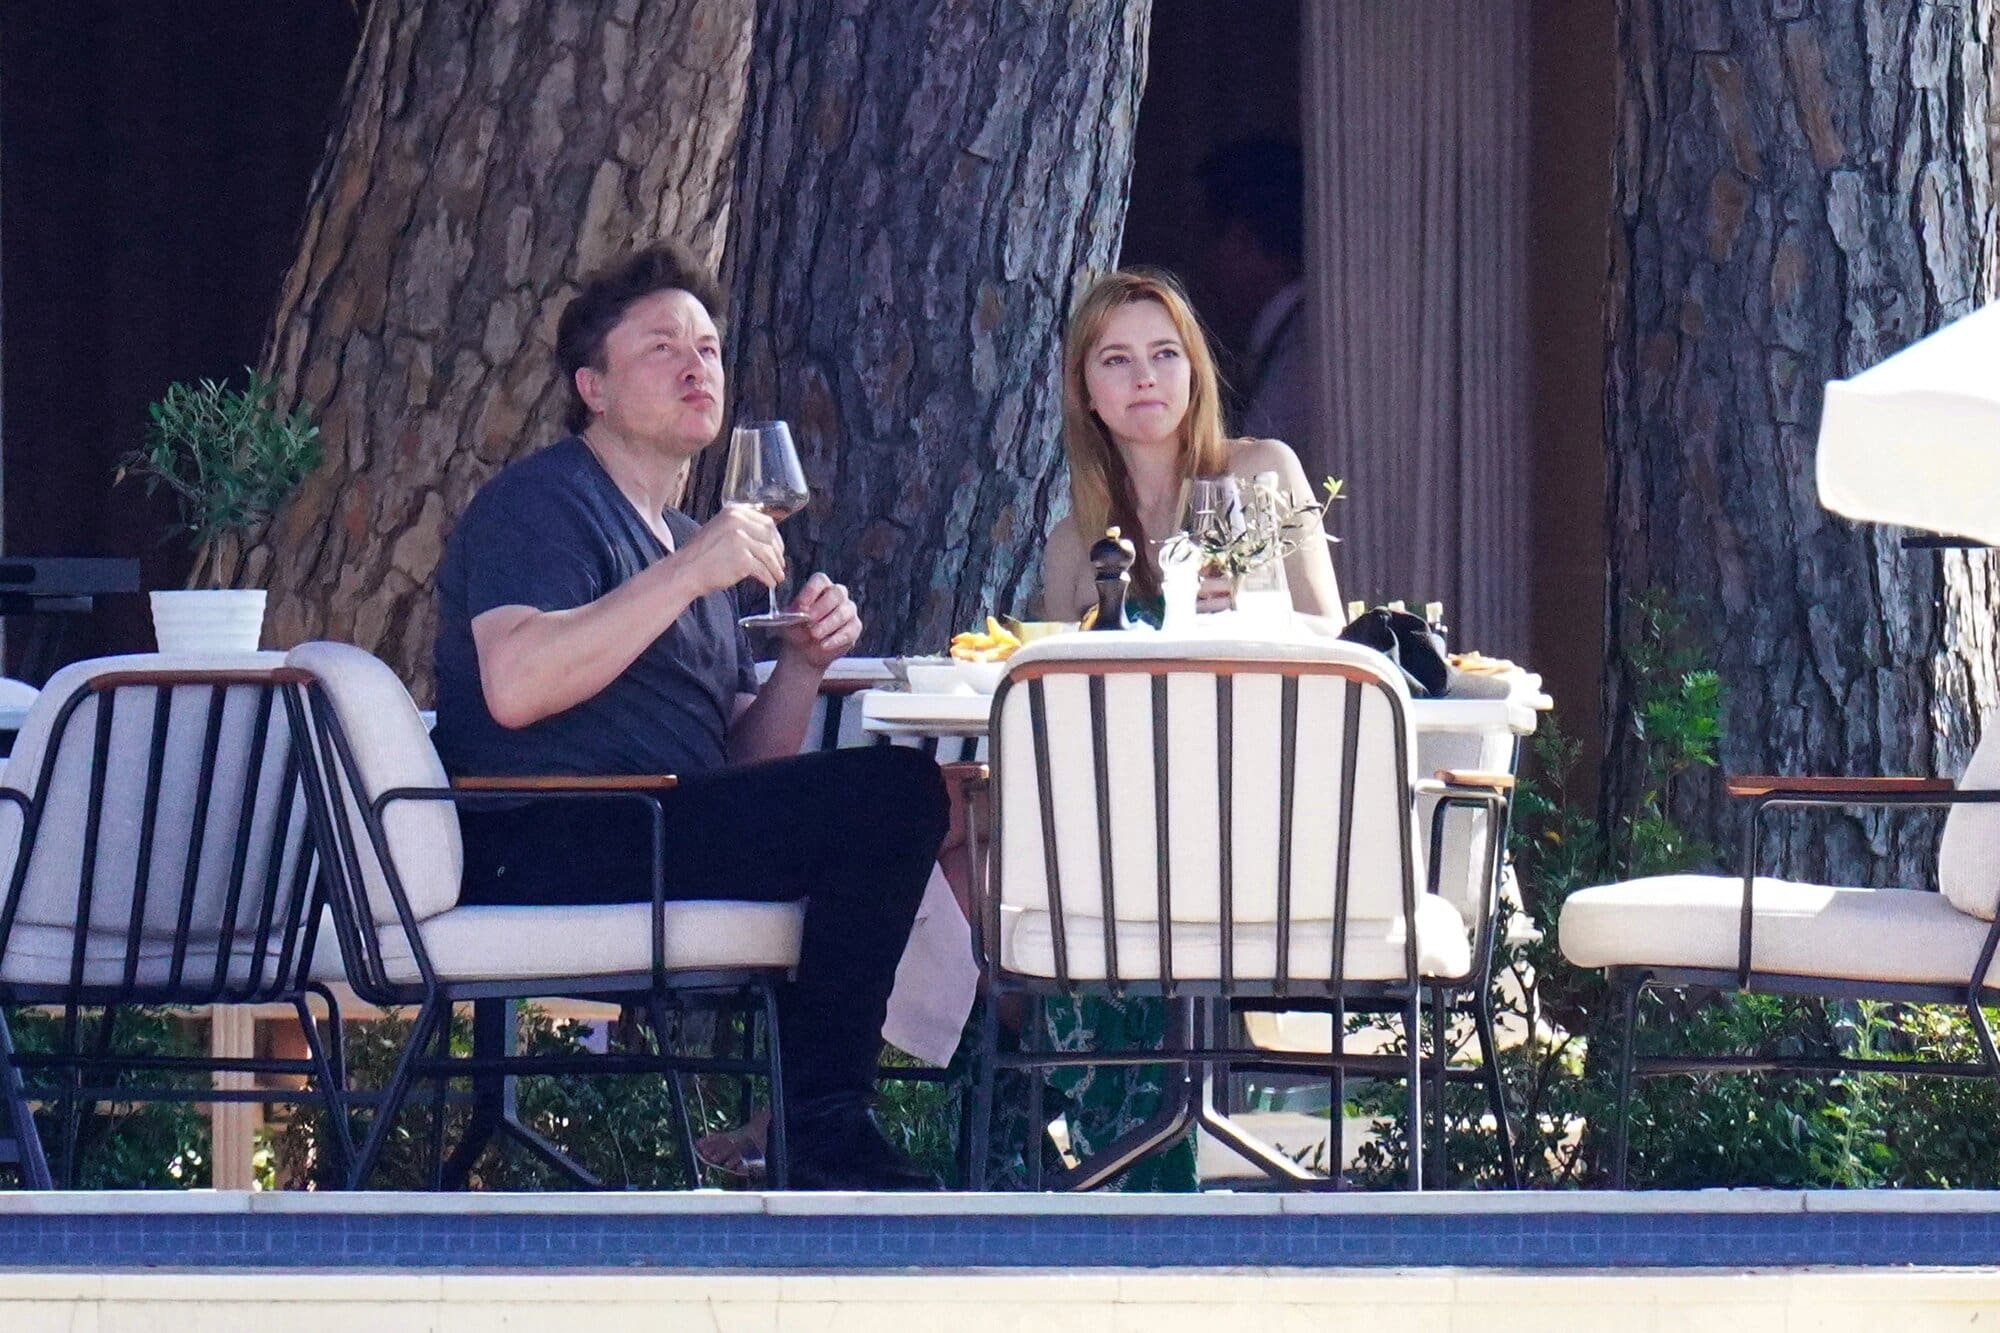 Elon Musk Begging Ex-Girlfriend Natasha Bassett To Come Back To Him After Their Breakup